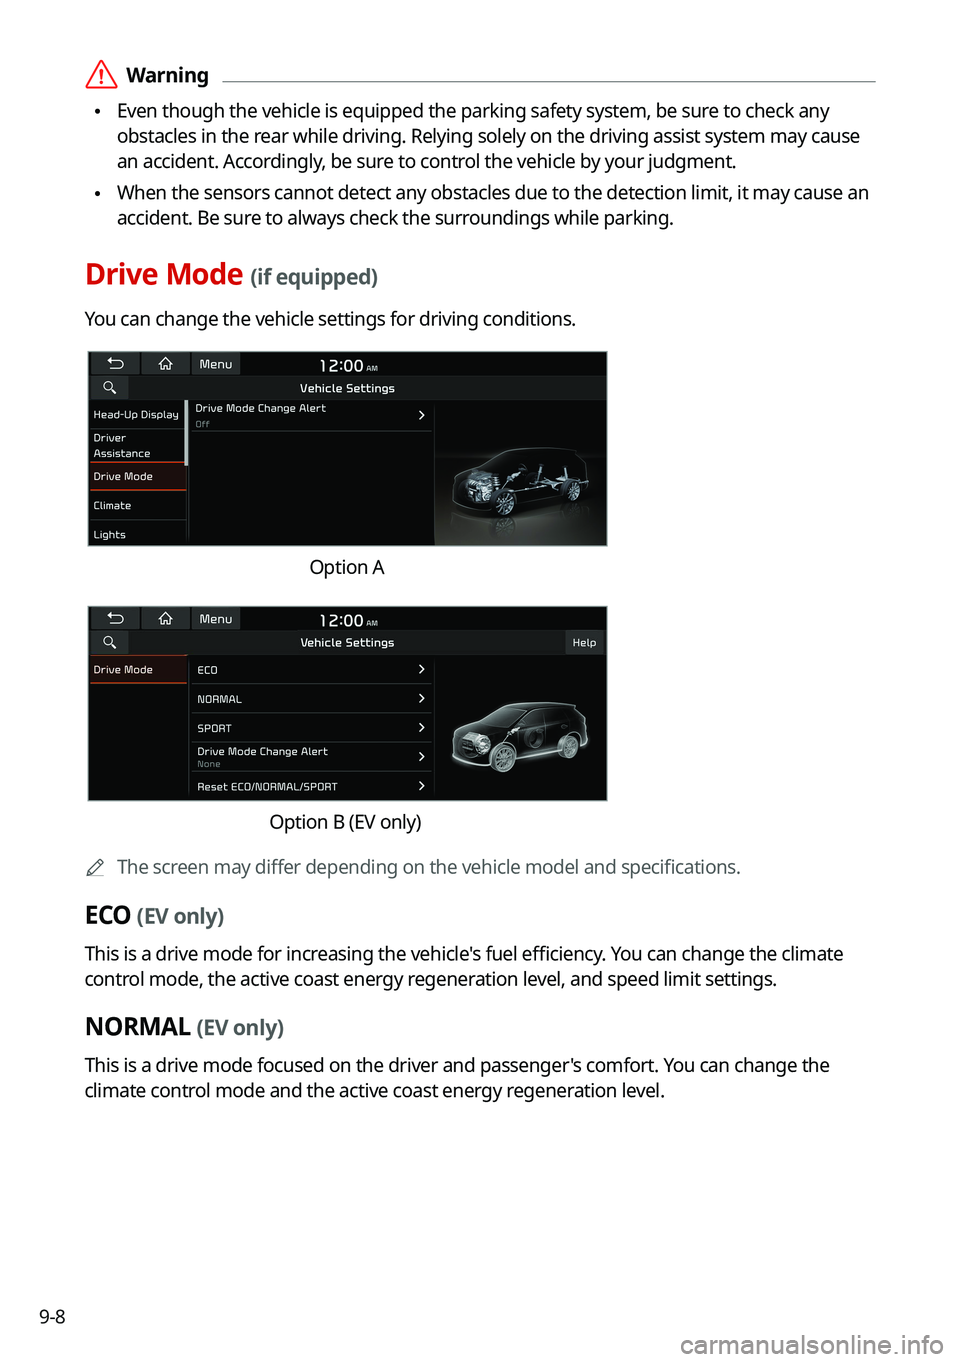 KIA FORTE 2021  Navigation System Quick Reference Guide 9-8
 \335Warning
 \225Even though the vehicle is equipped the parking safety system, be sure to check any 
obstacles in the rear while driving. Relying solely on the driving assist system may cause 
a